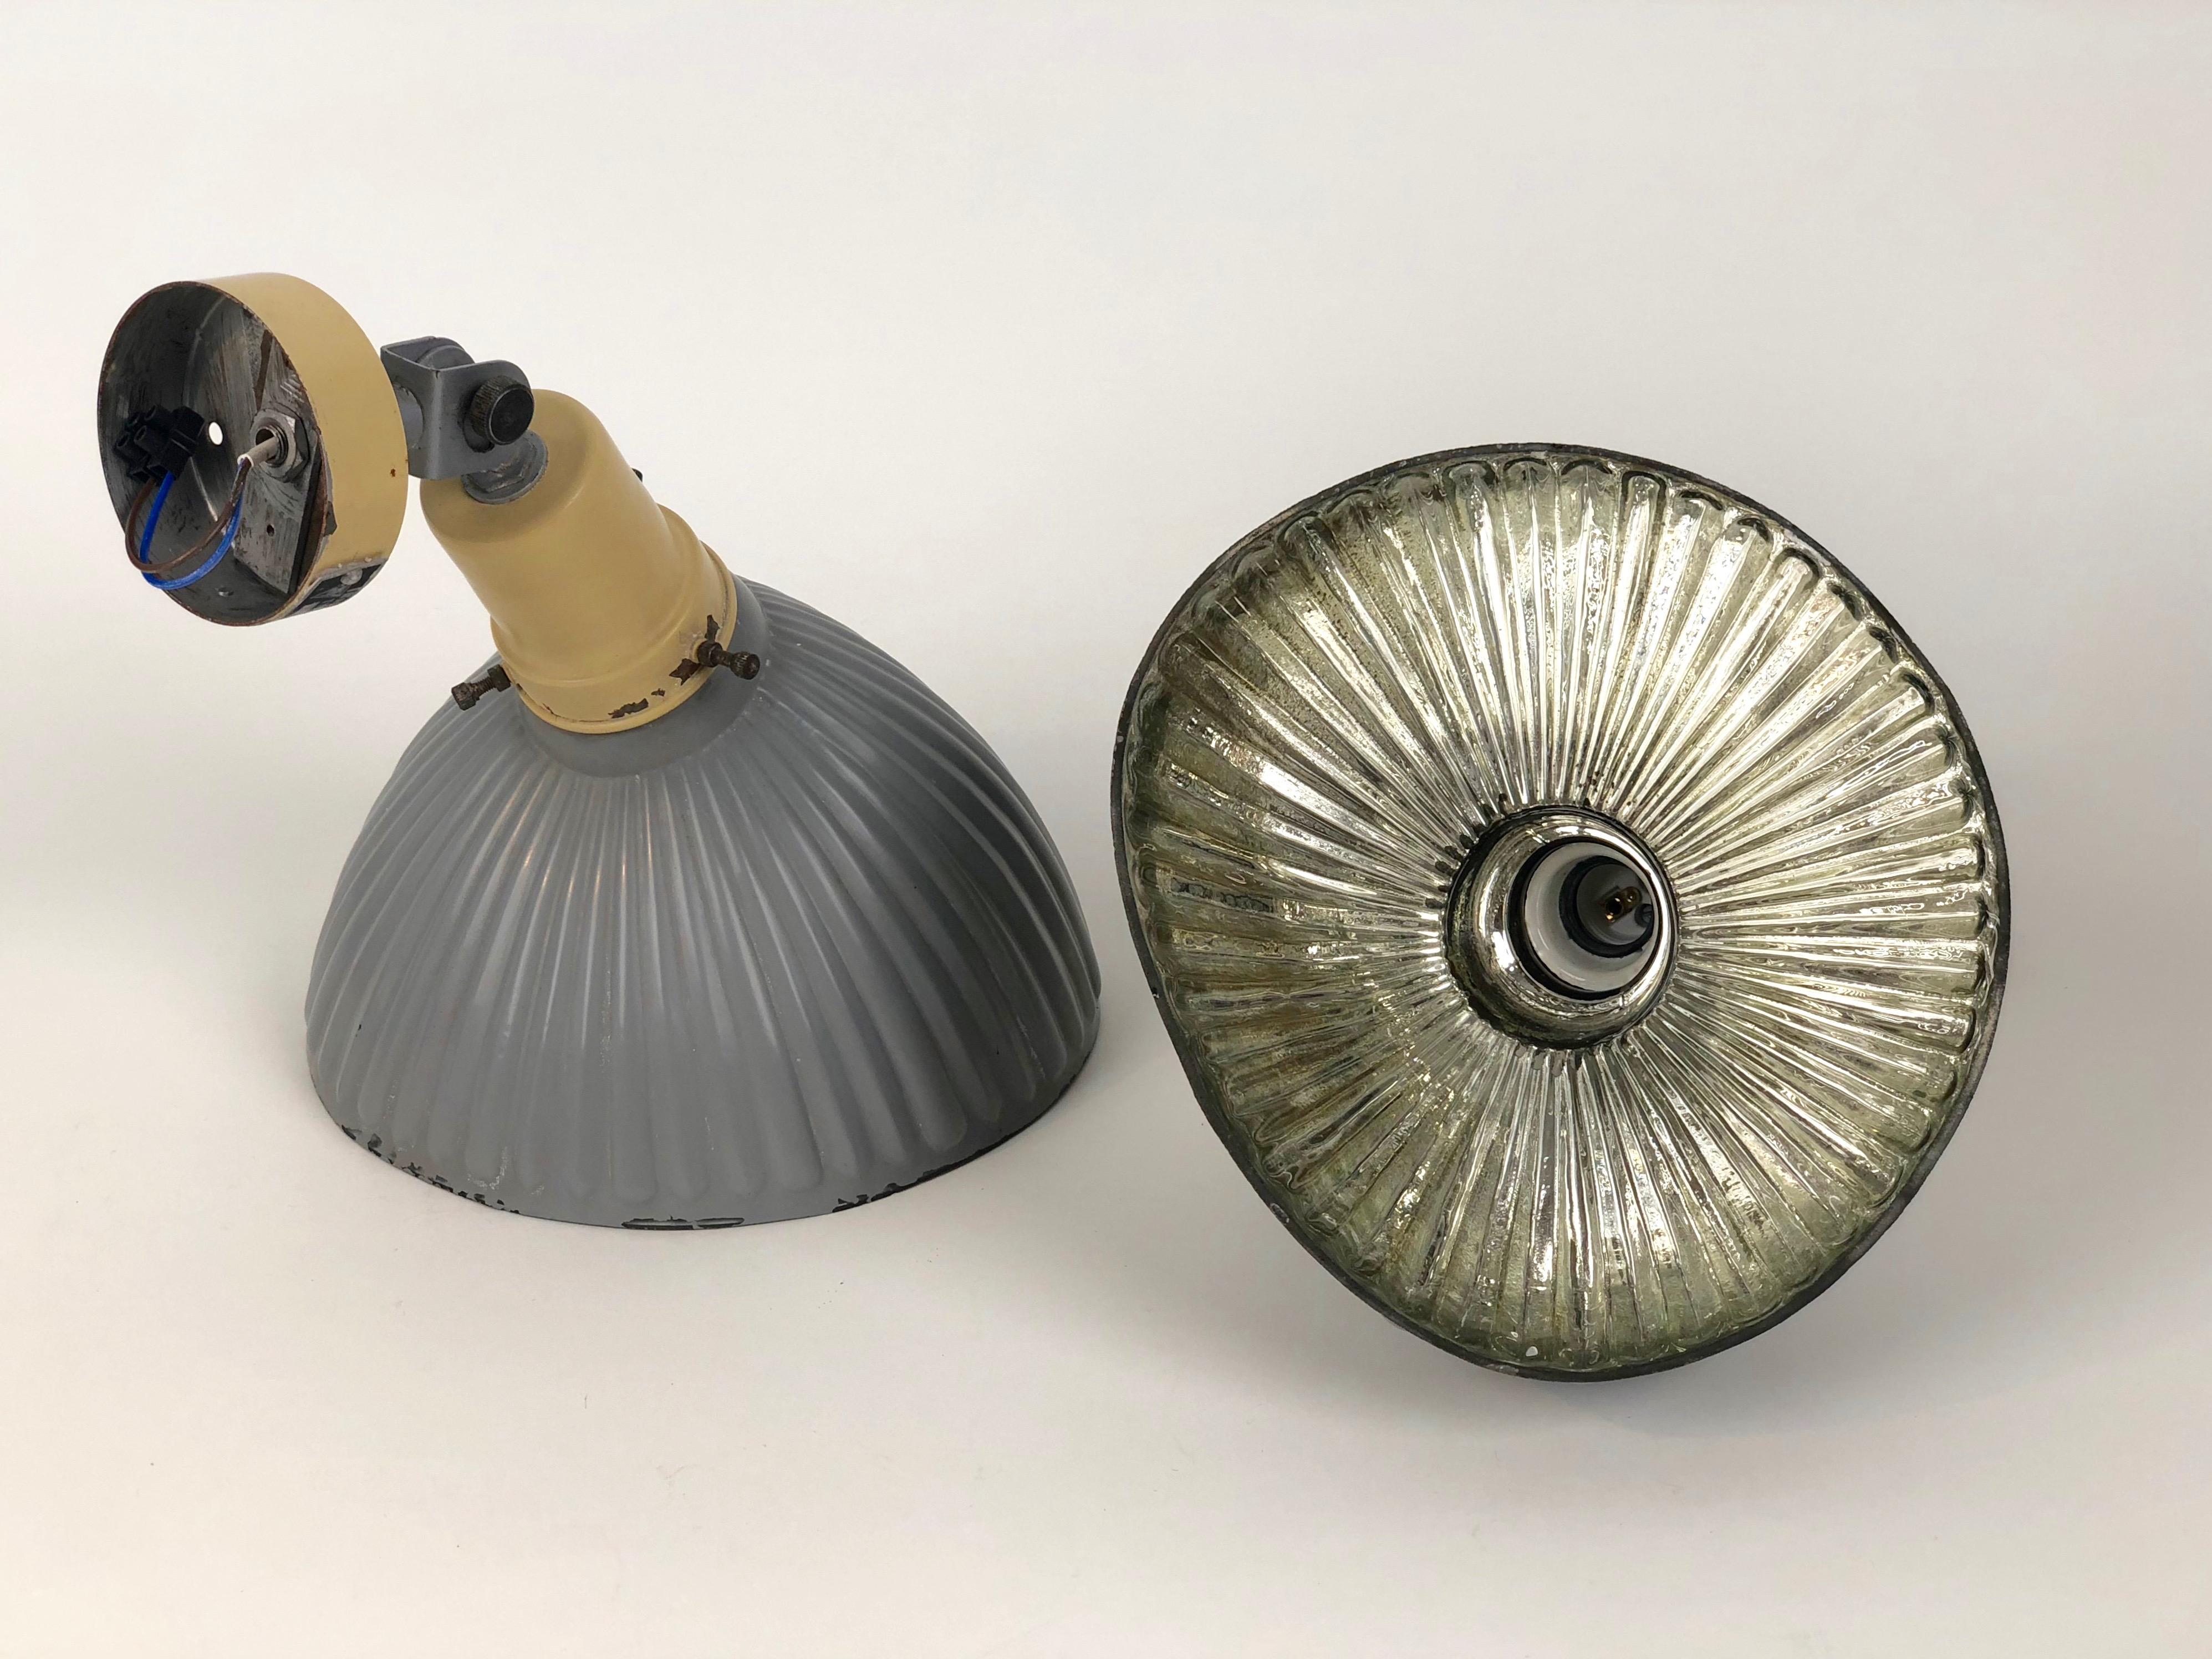 A pair of industrial, wall mounted, mirrored, glass wall lamps, produced by Instala Decin from the Czech Republic. Produced in the 1950s,
The glass shades have a fluted form with a reflective mirrored surface on the inside. Outside, the glass